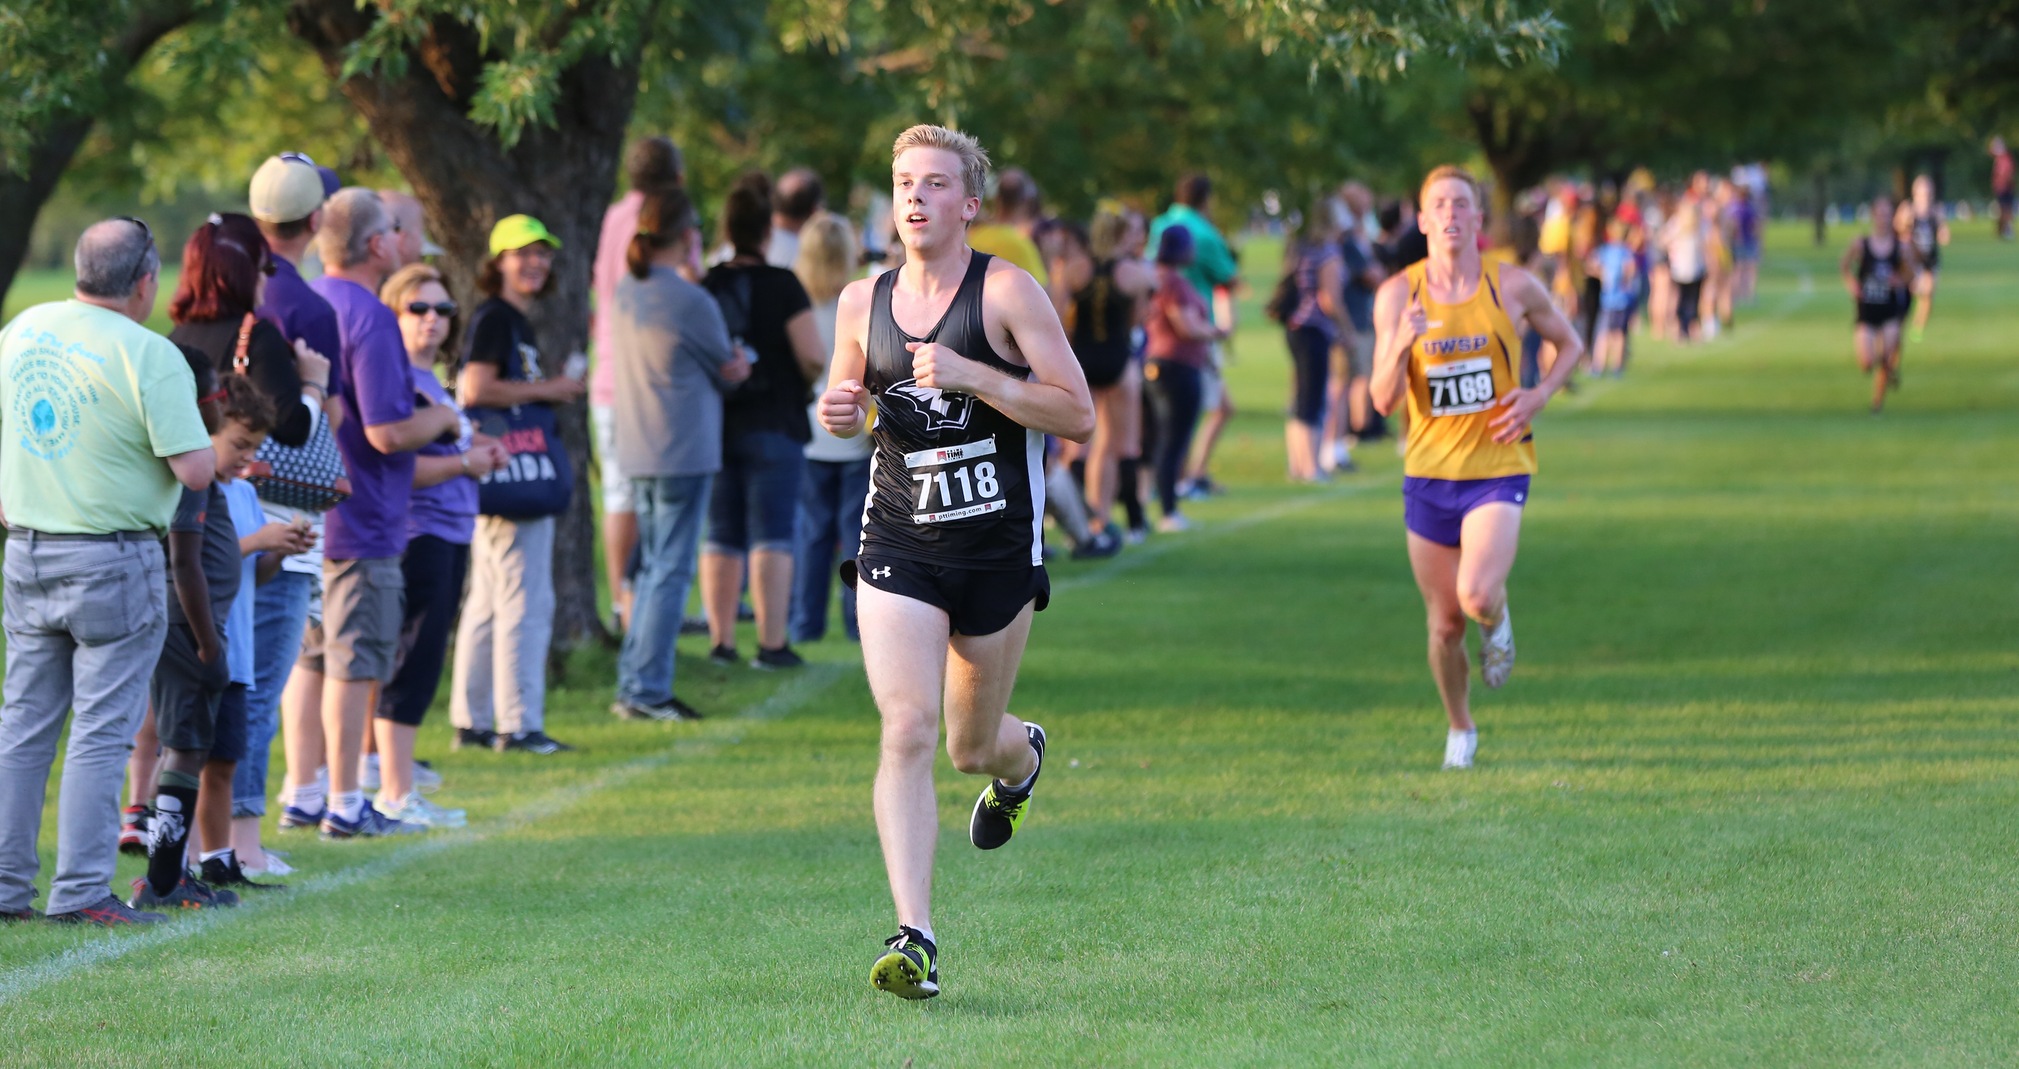 Andrew Rathkamp finished 45th among the 309 runners at this year's Roy Griak Invitational.